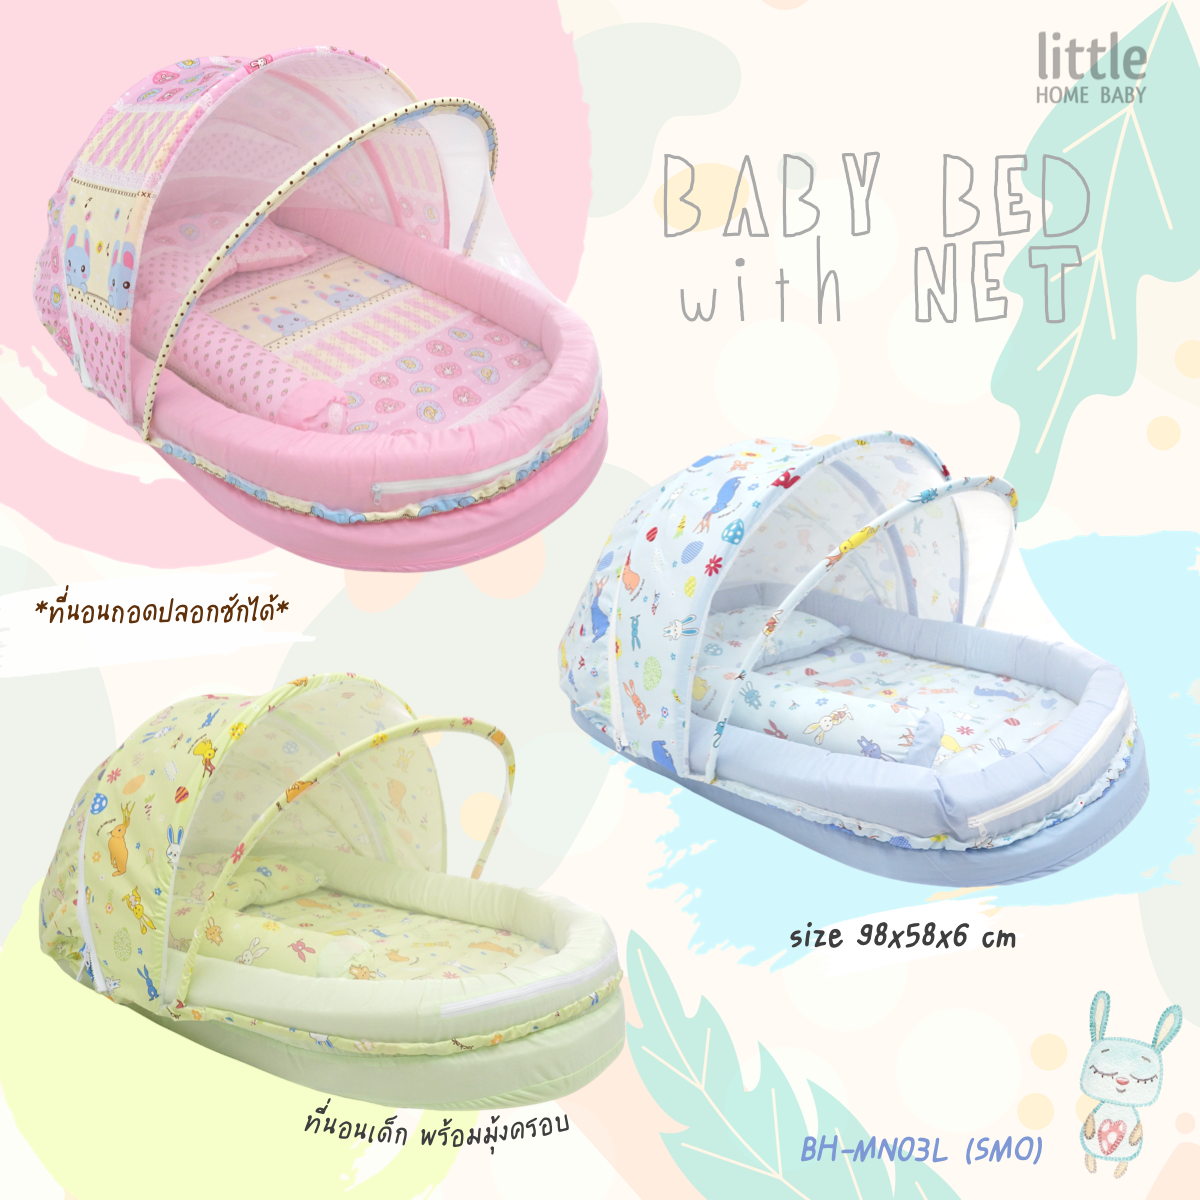 Baby Bed set - baby bed with net